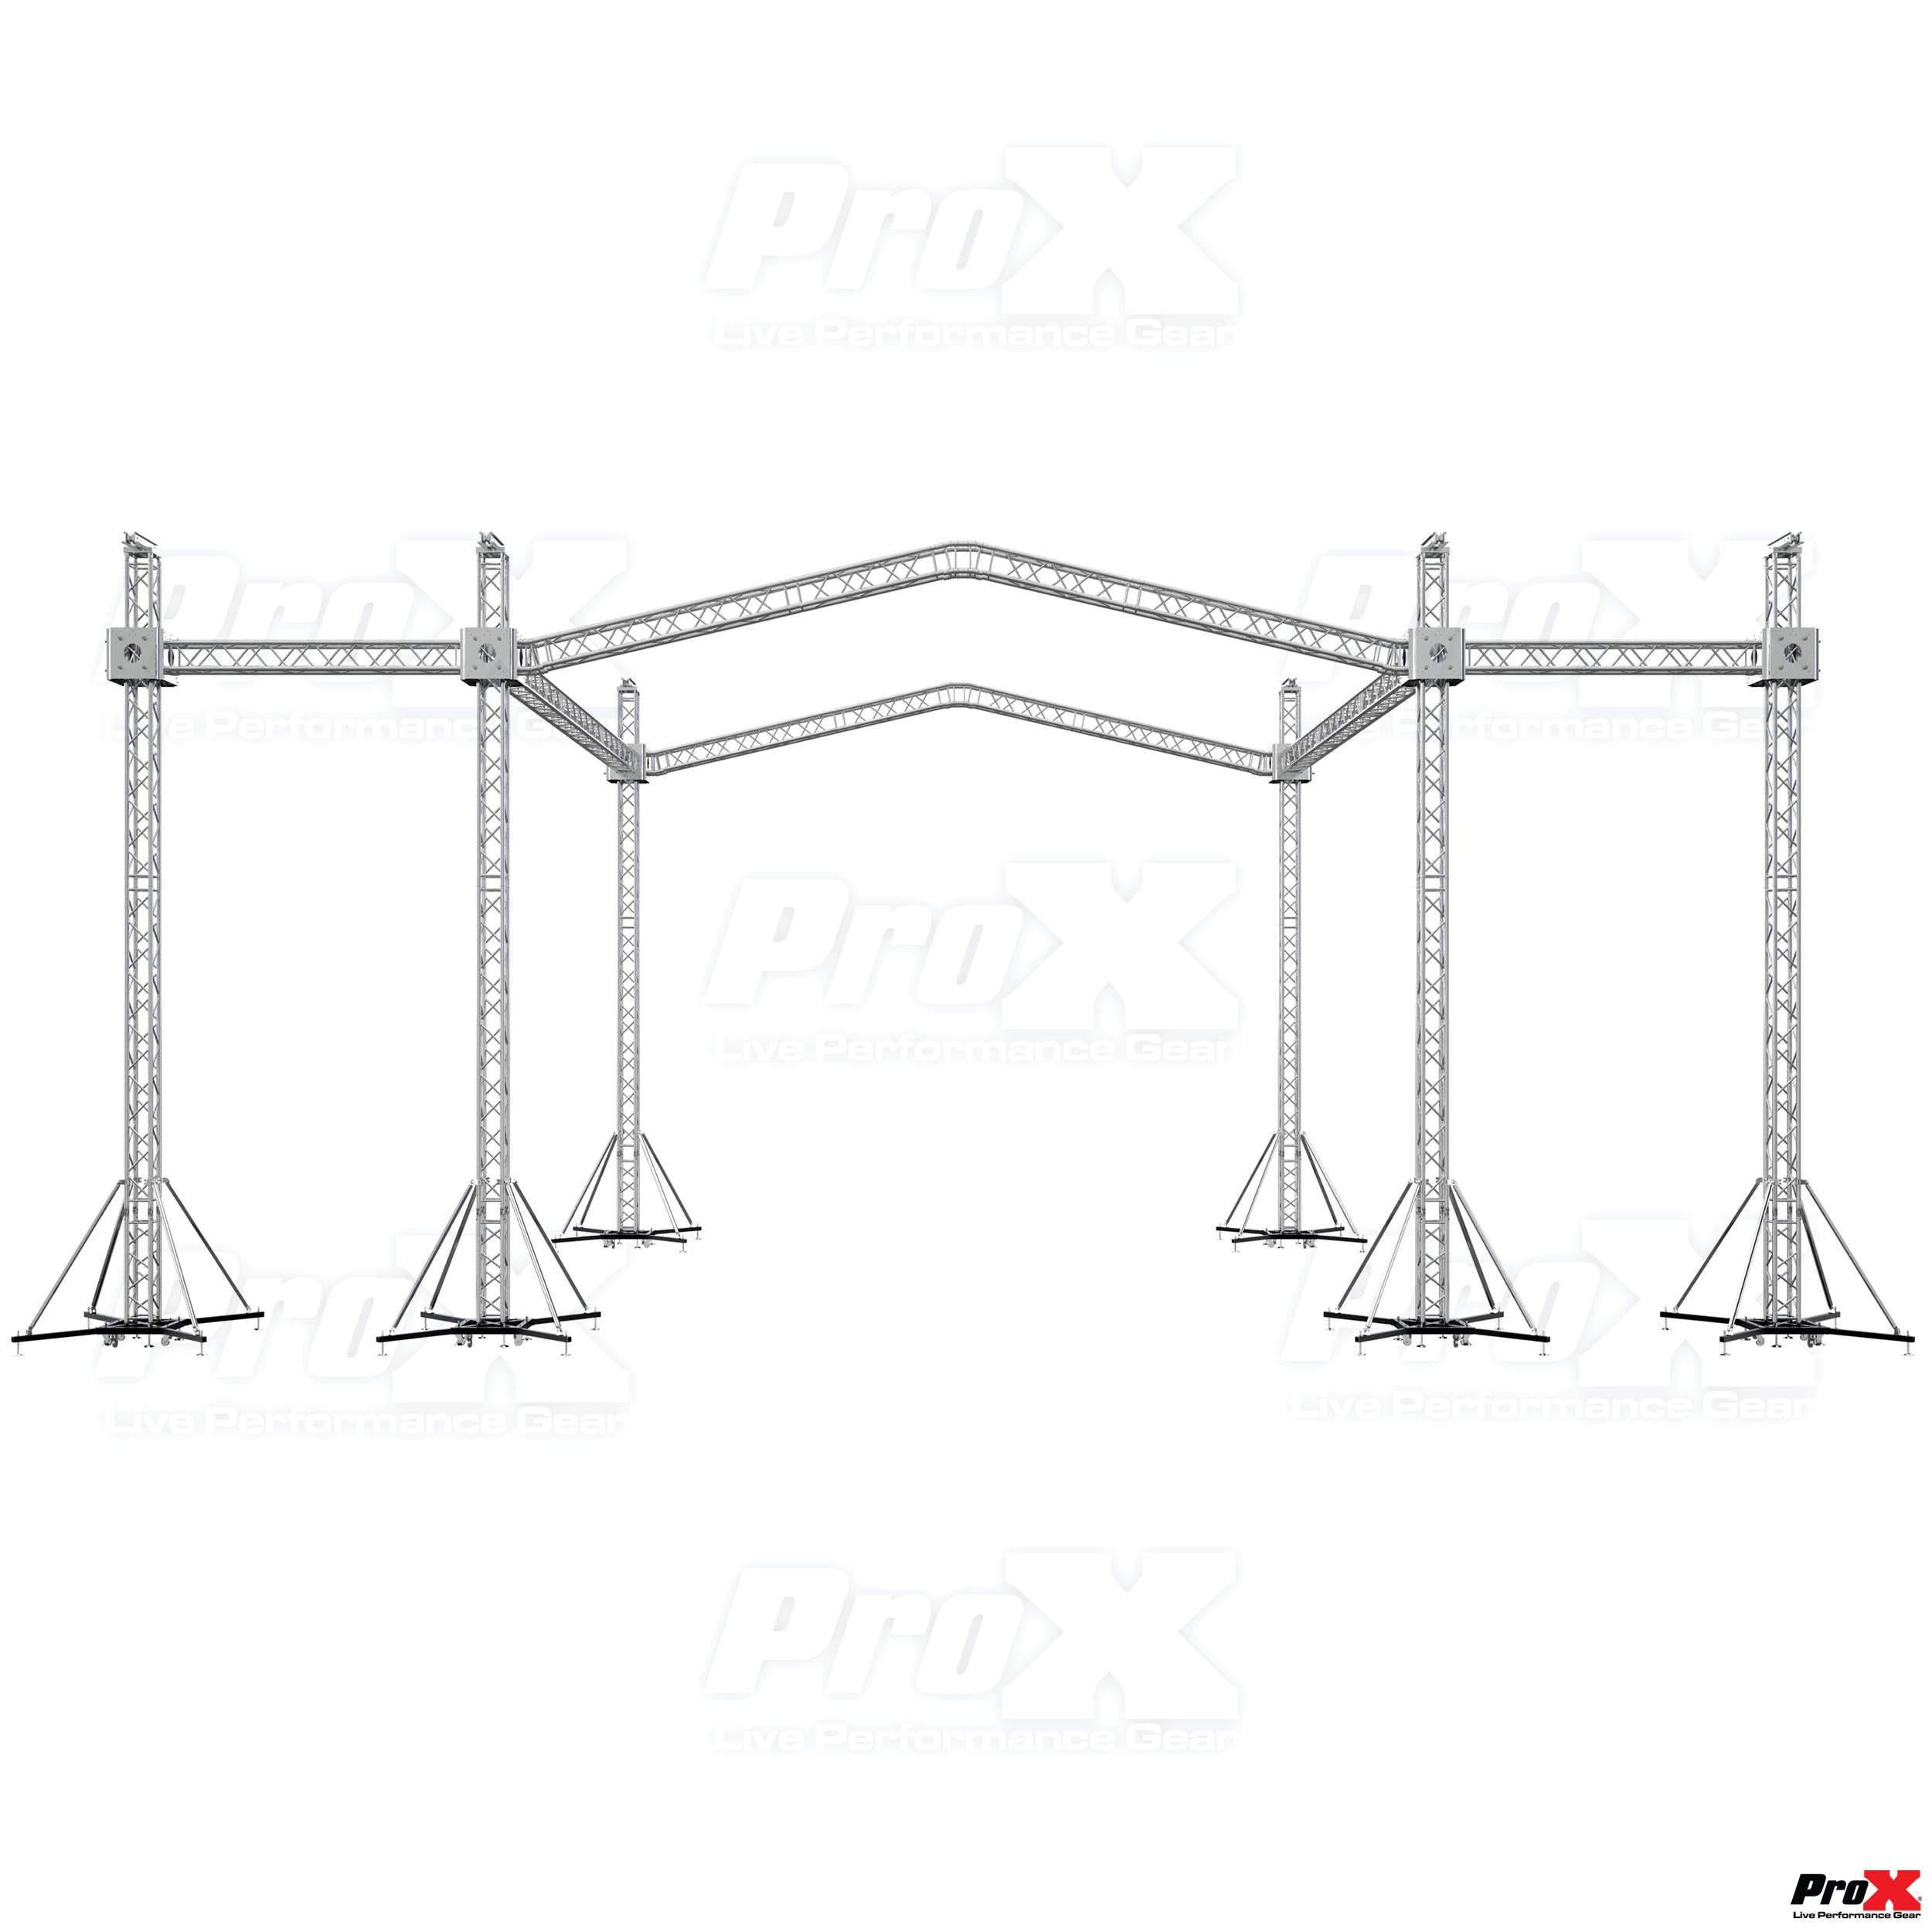 Pro X 12D Stage Roofing System with 7 Ft Speaker Wings and 6 Chain Hoists | 30 Ft W x 30 Ft L x 23 Ft H XTP-GS303023-PR2-12D